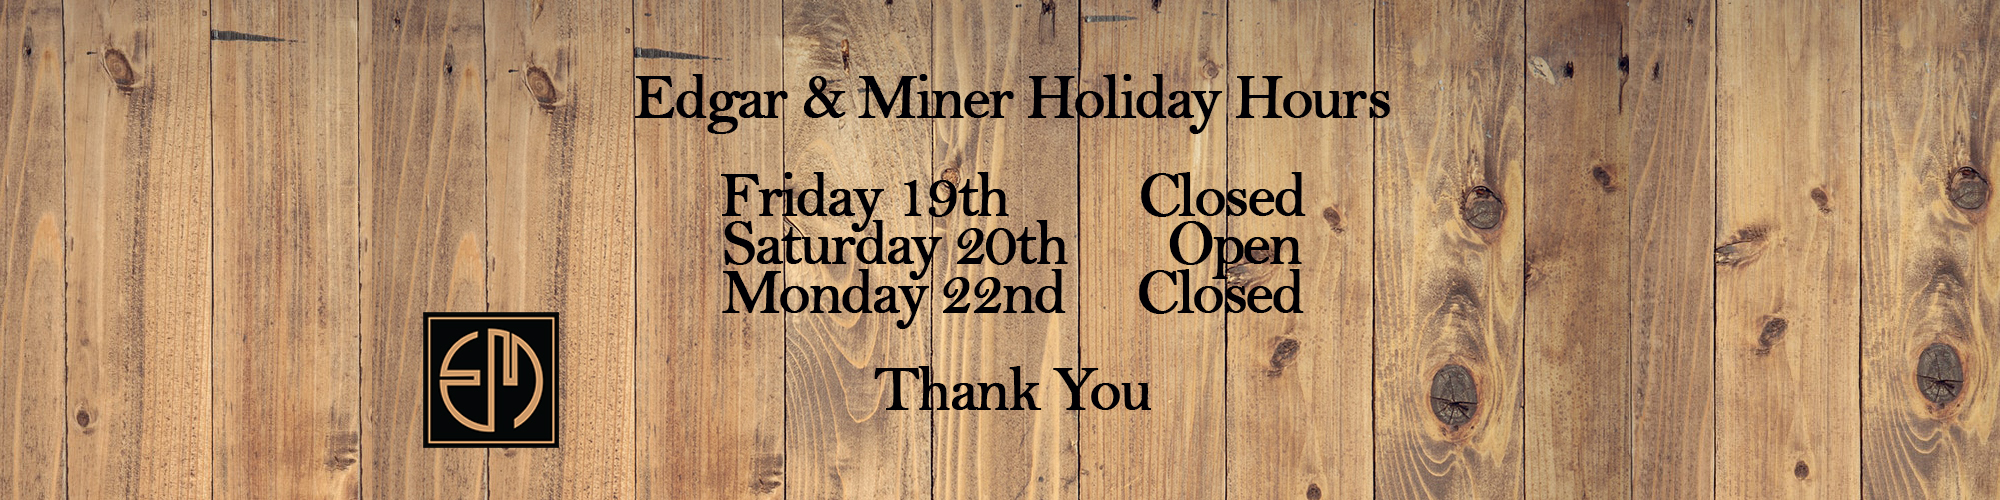 Edgar and Miner Holiday Hours